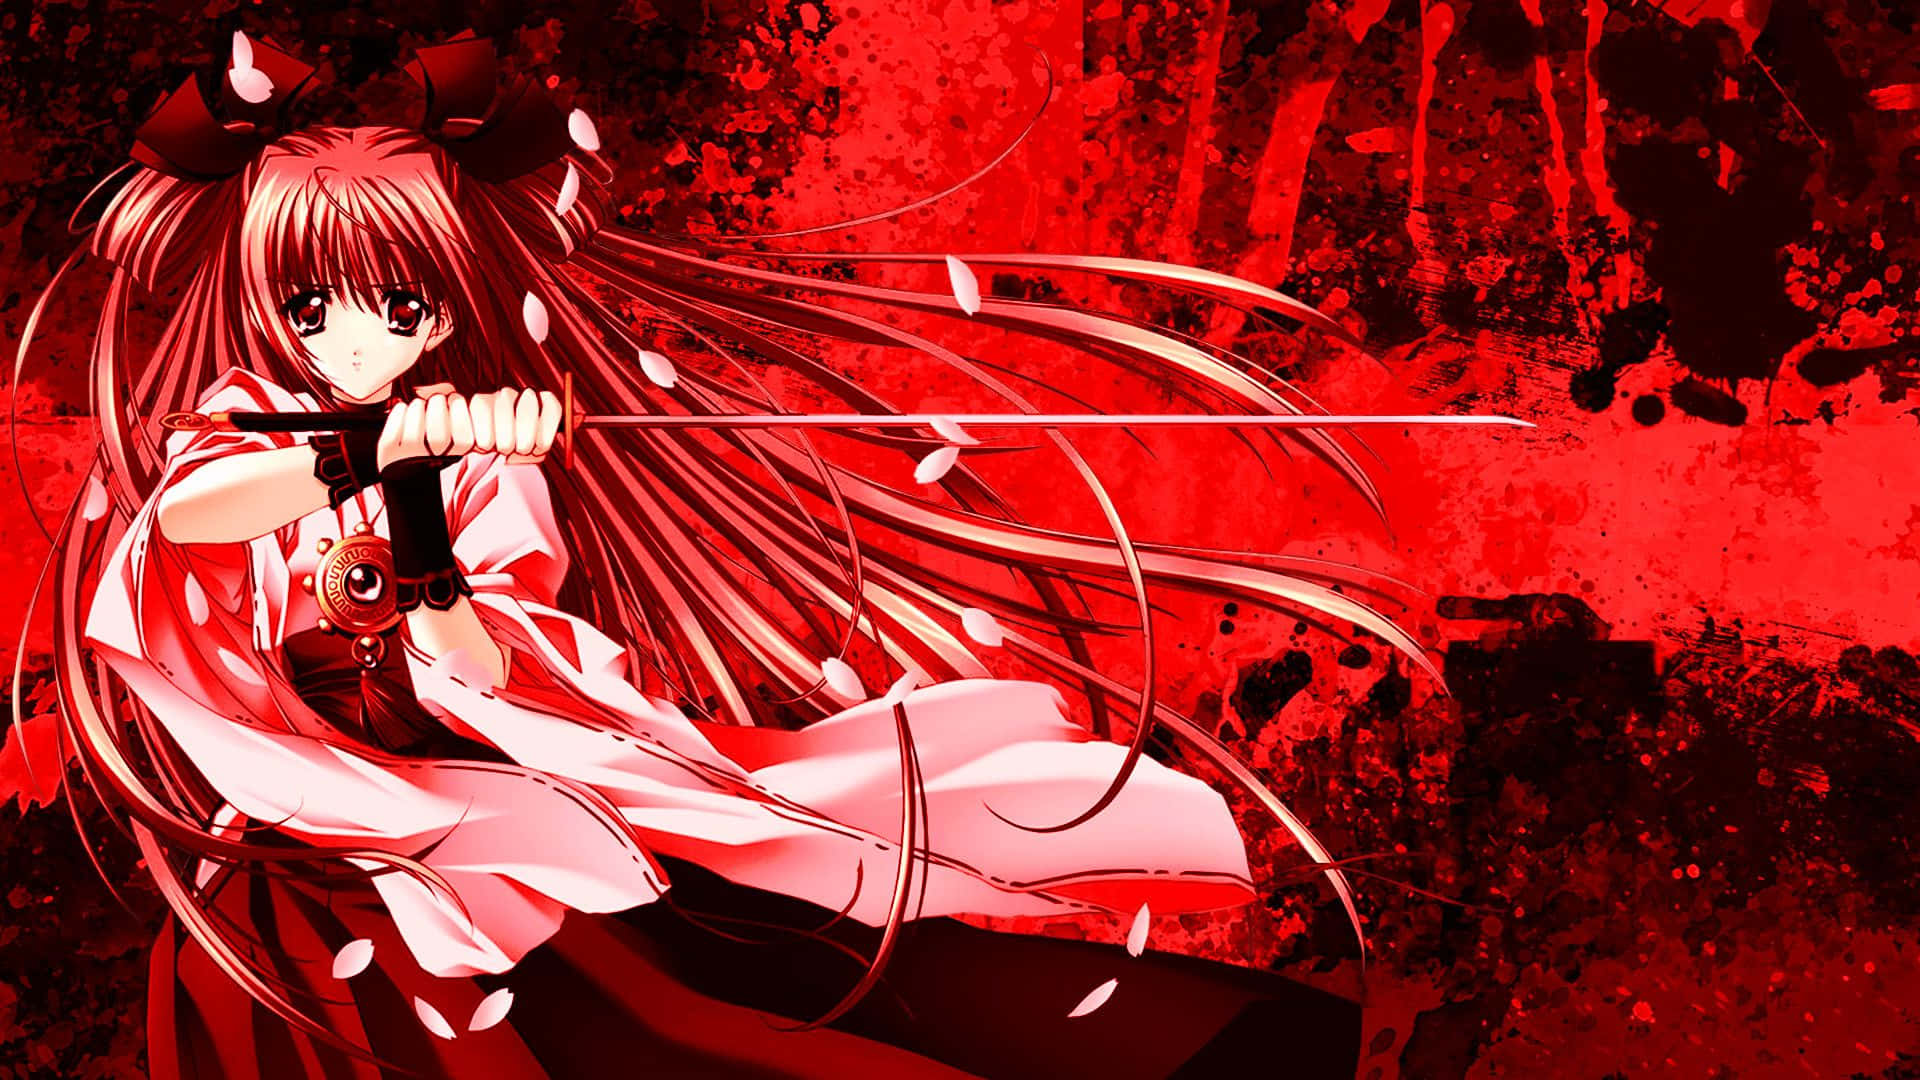 Mystical Scene of Black and Red Anime Wallpaper